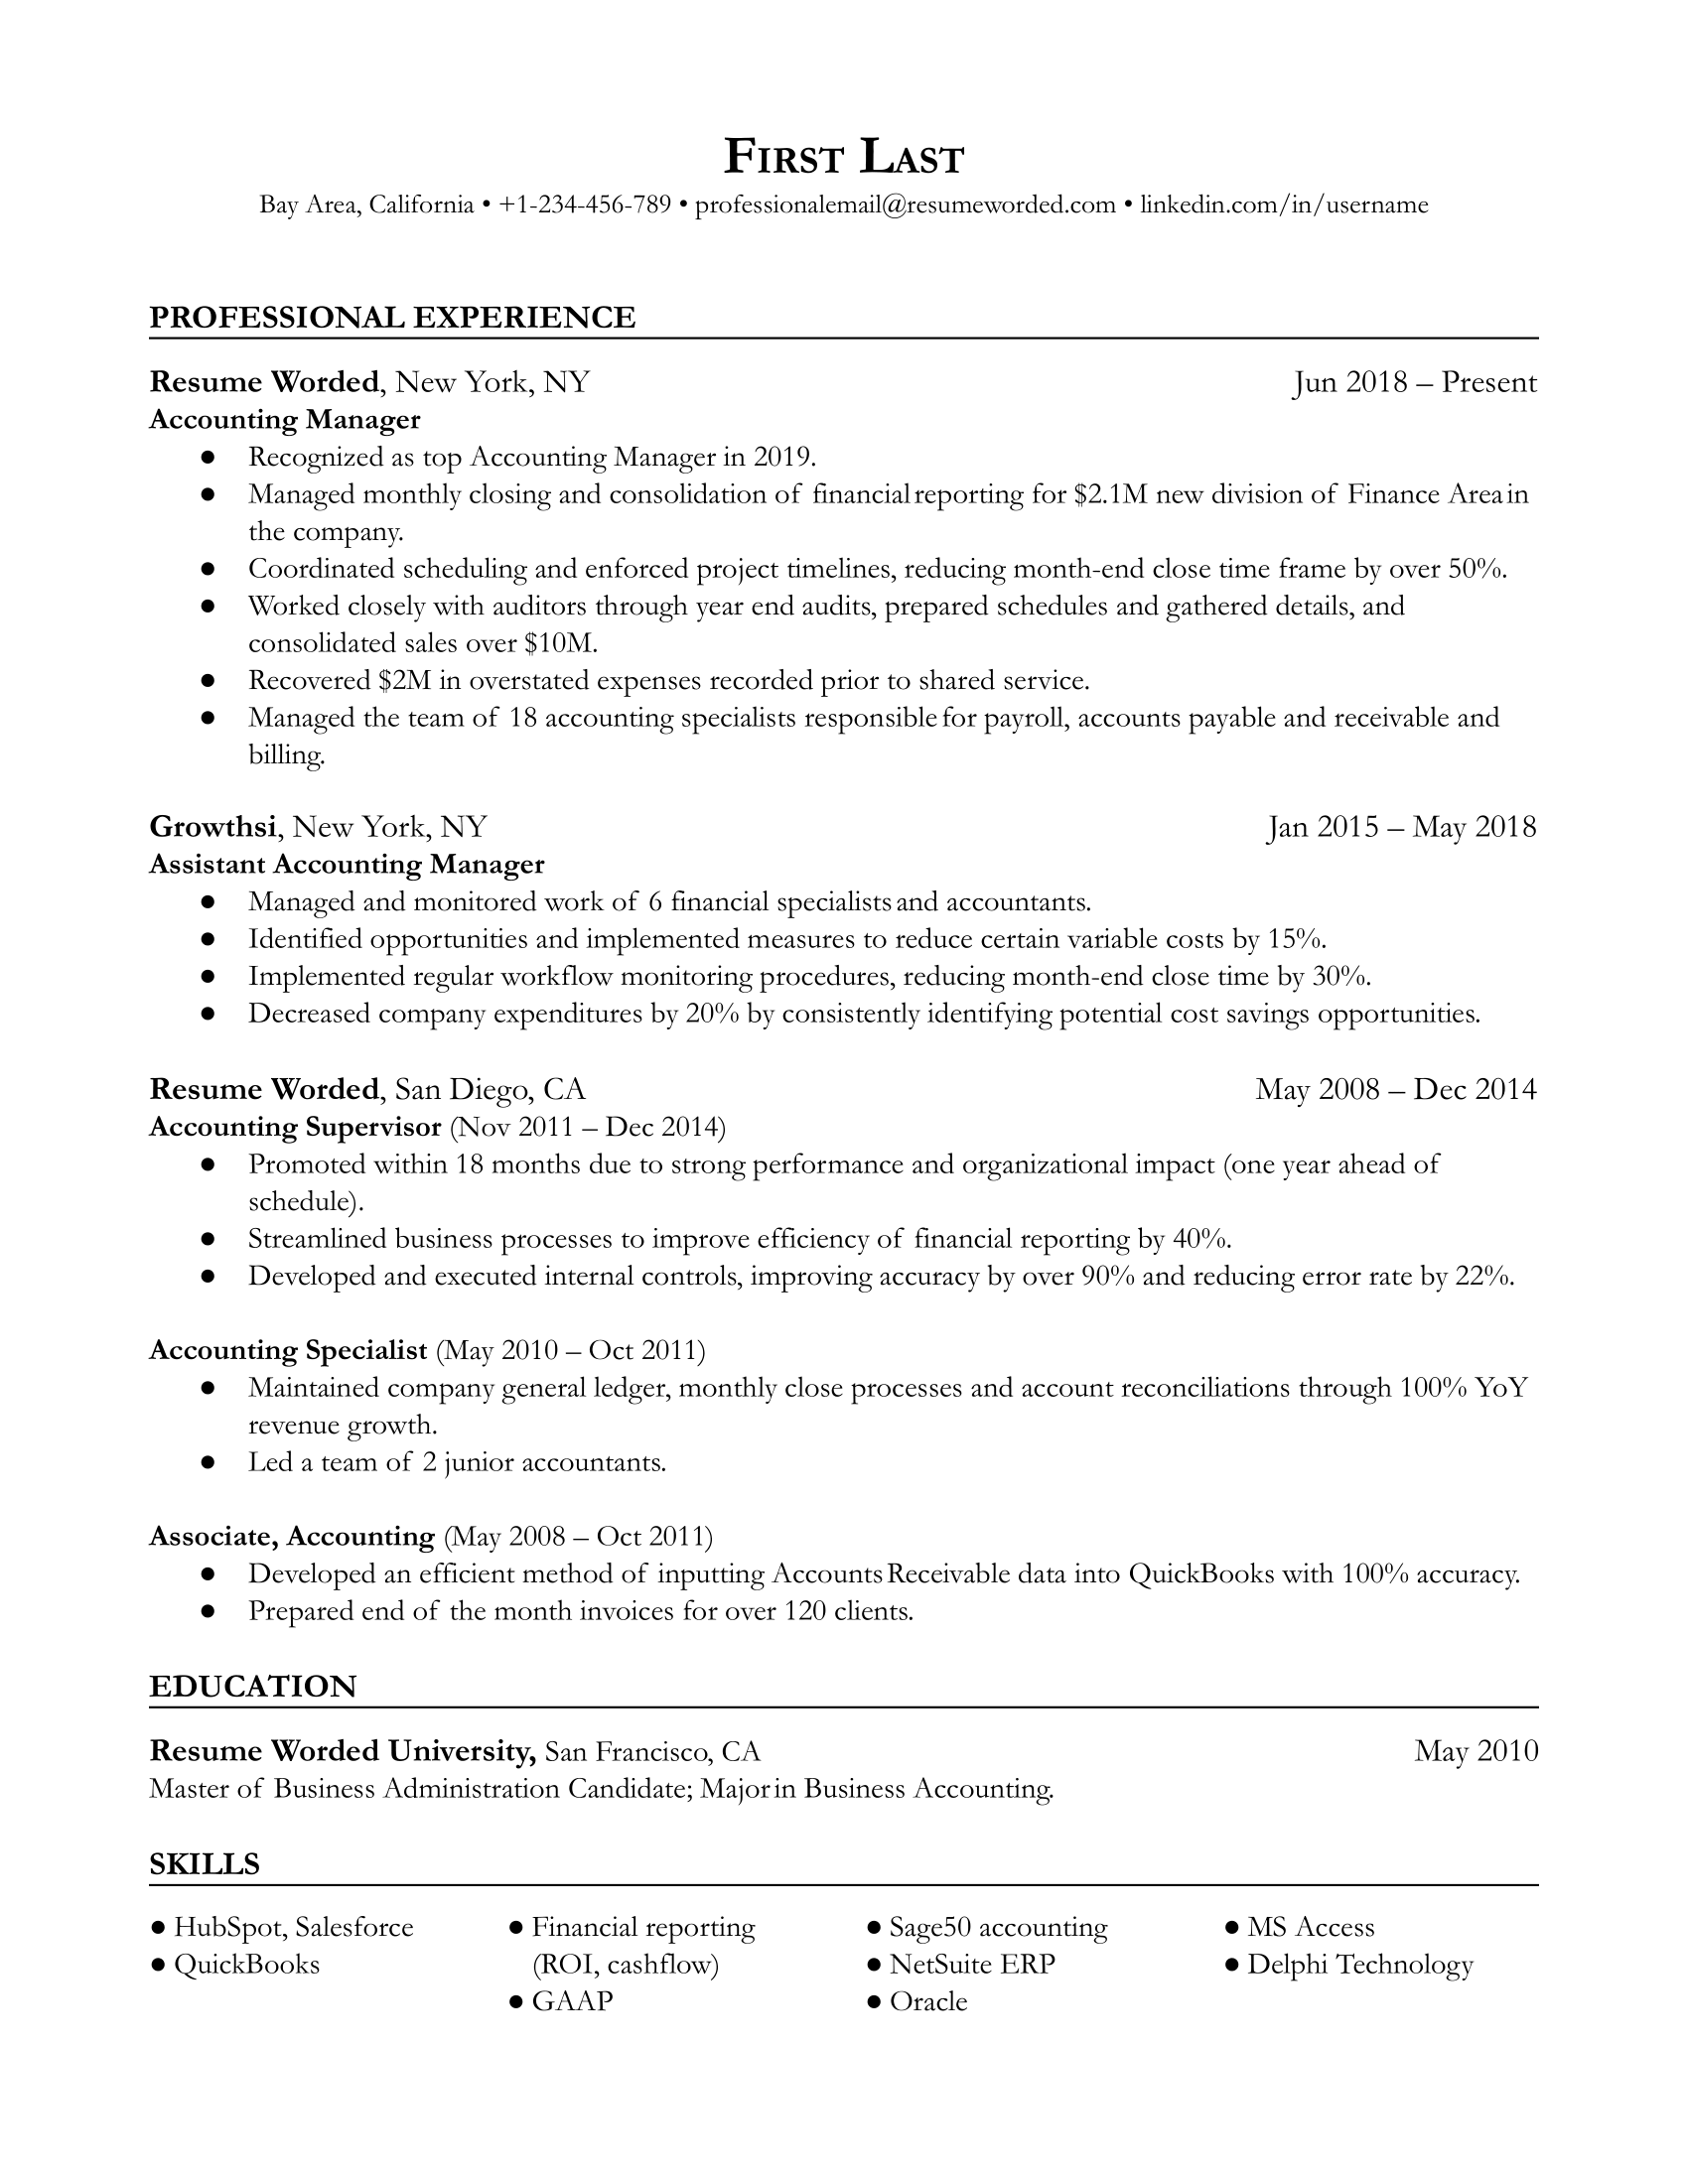 An accounting manager resume template prioritizing technical skills.